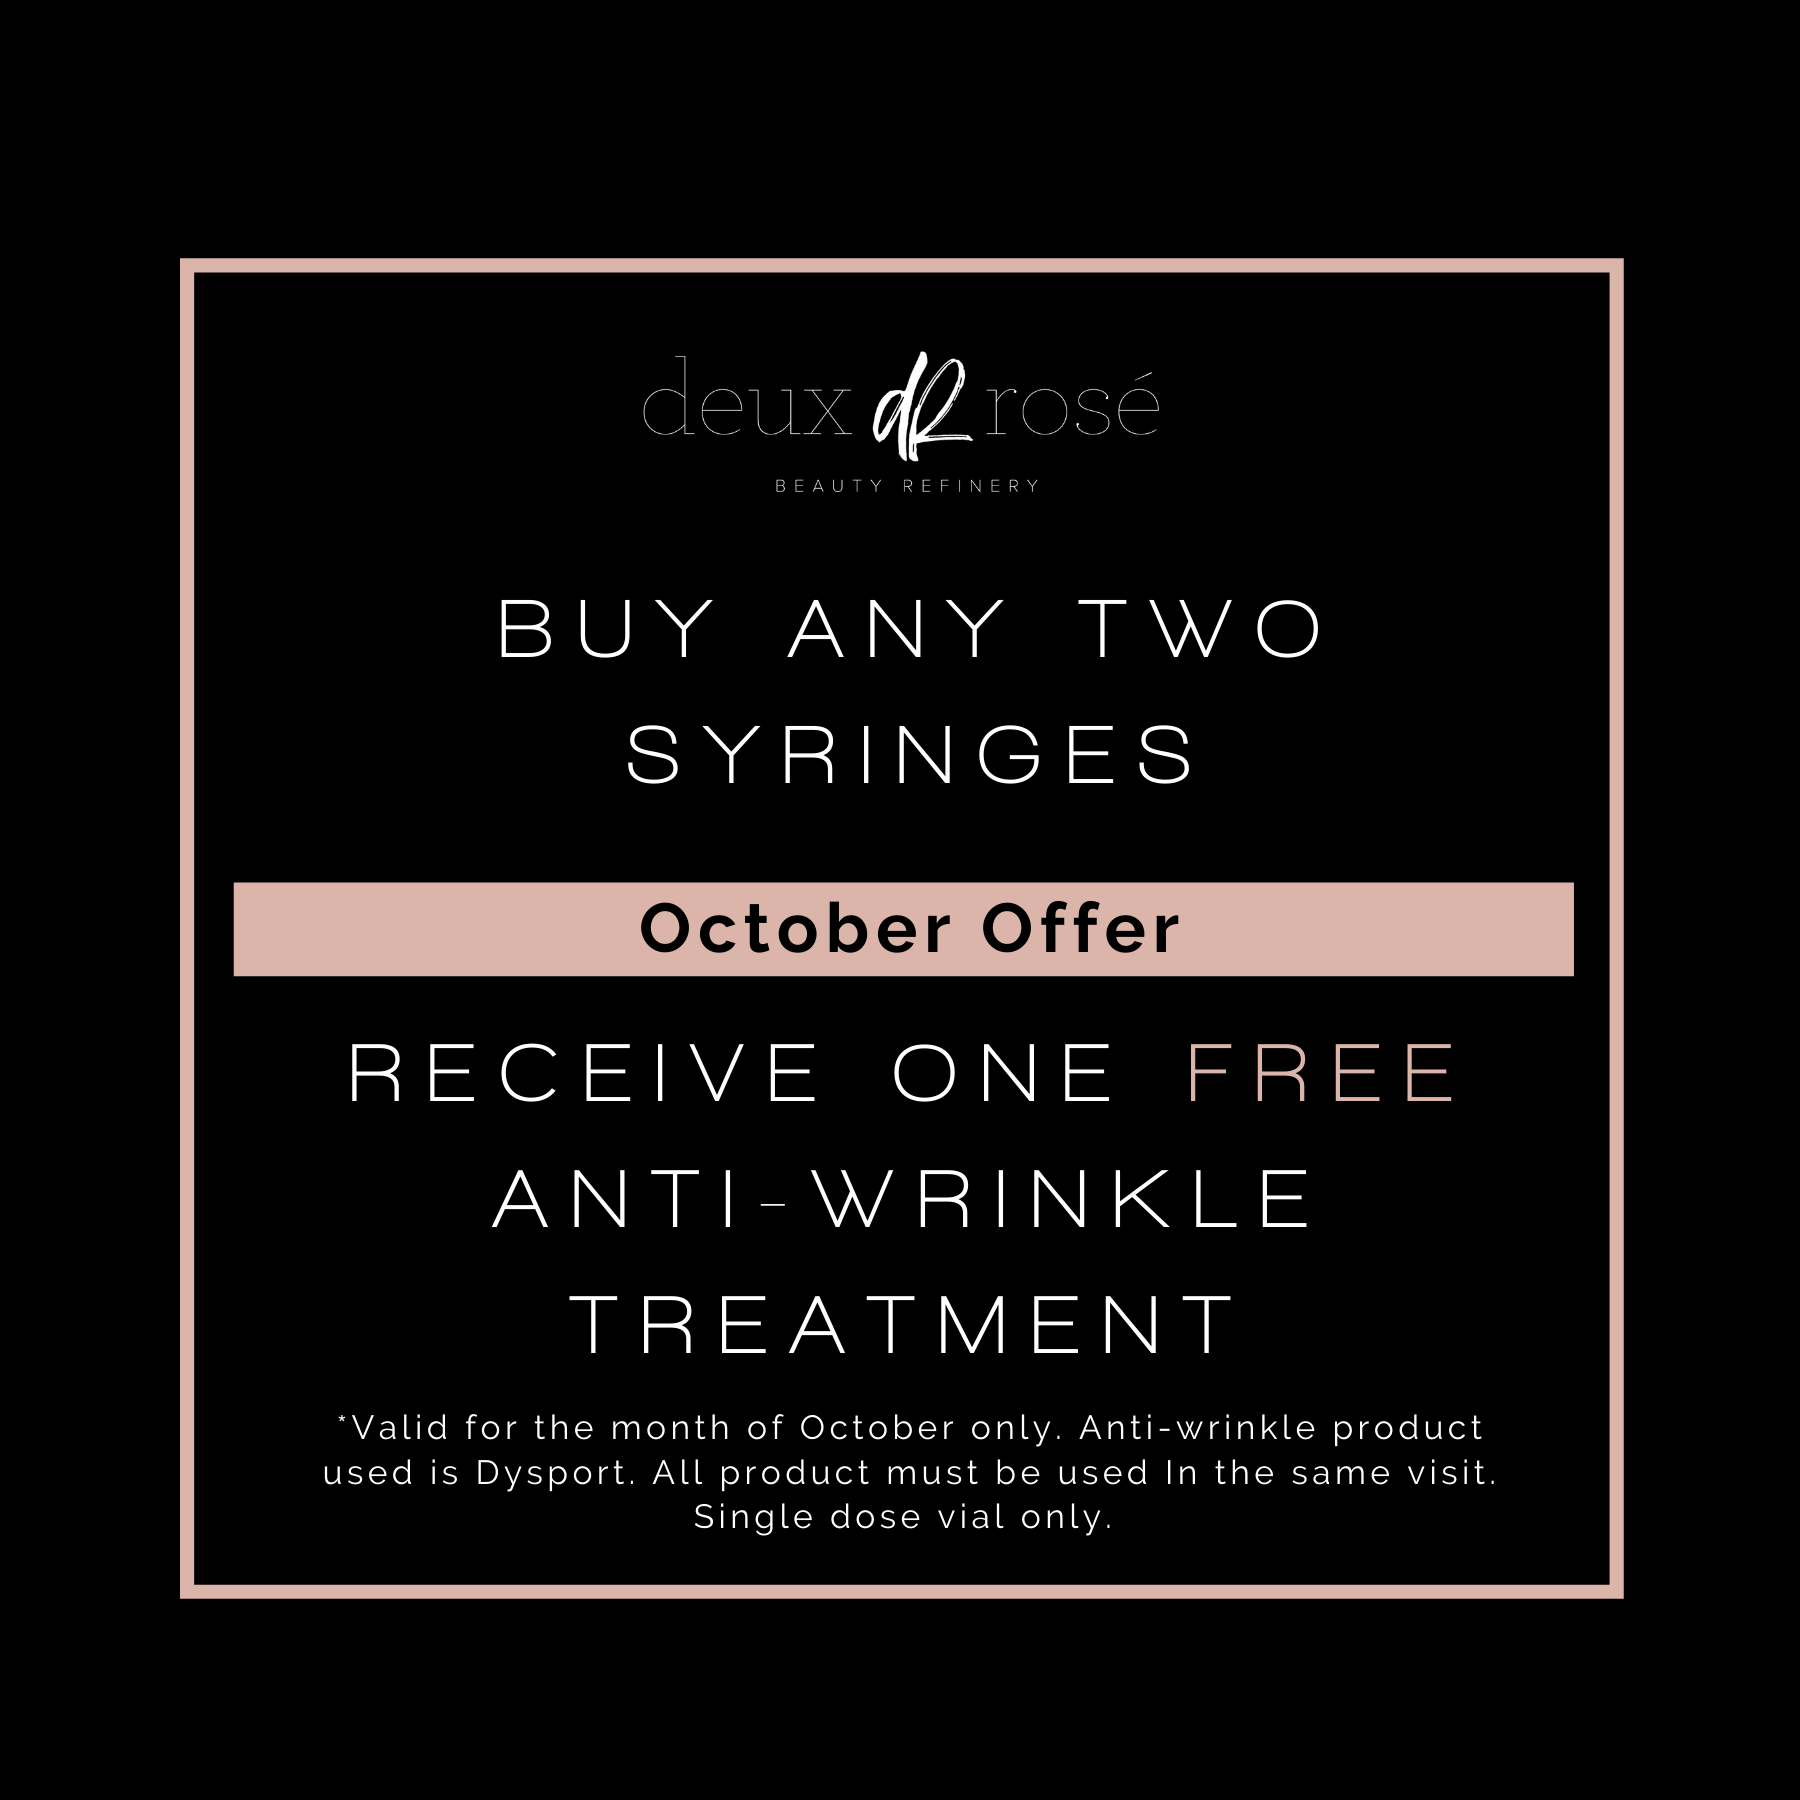 A graphic that says, "Buy any two syringes and receive one free anti-wrinkle treatment."